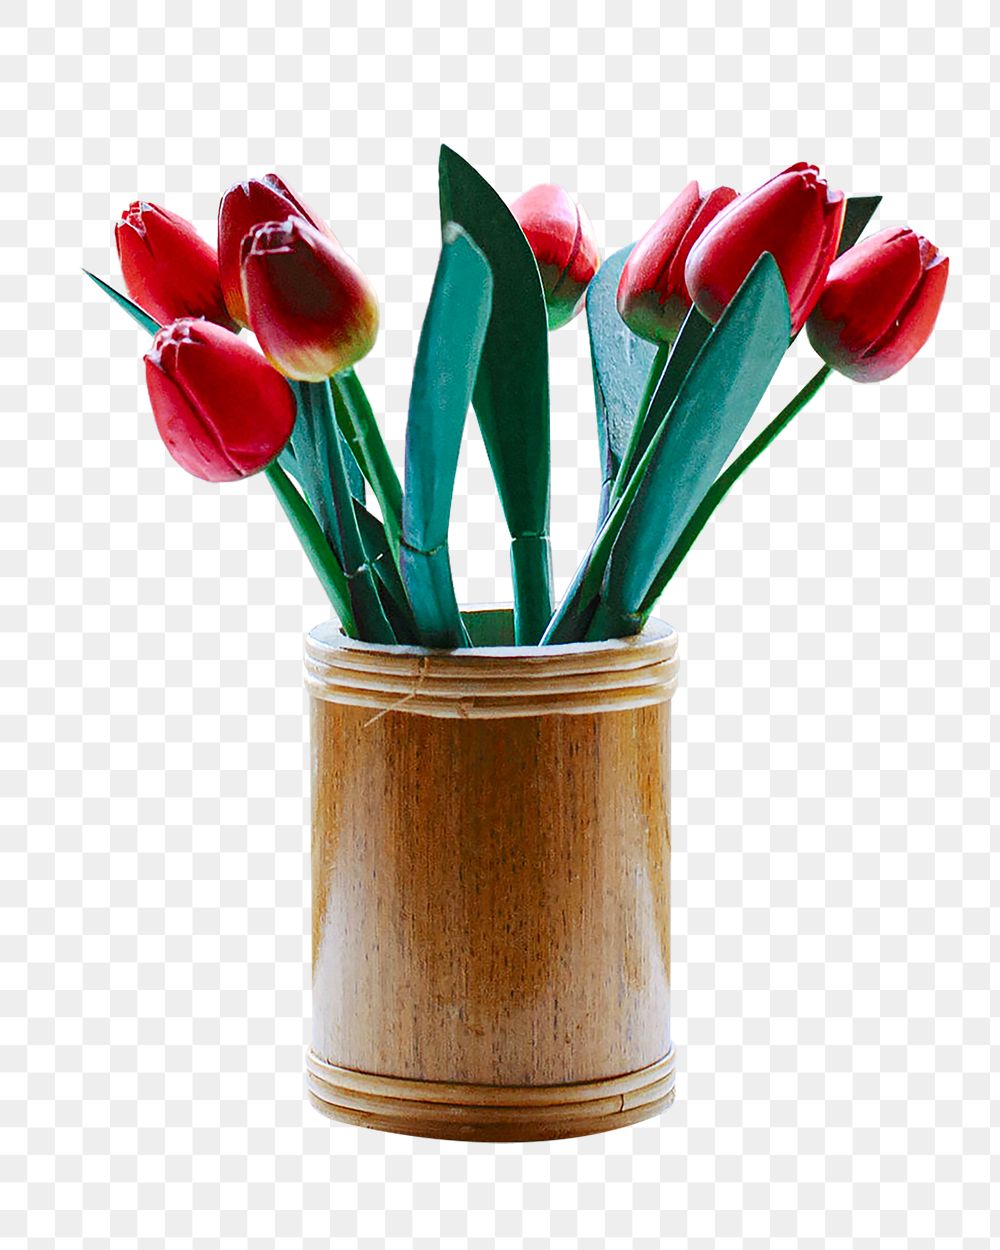 Pot of tulips png sticker, transparent background